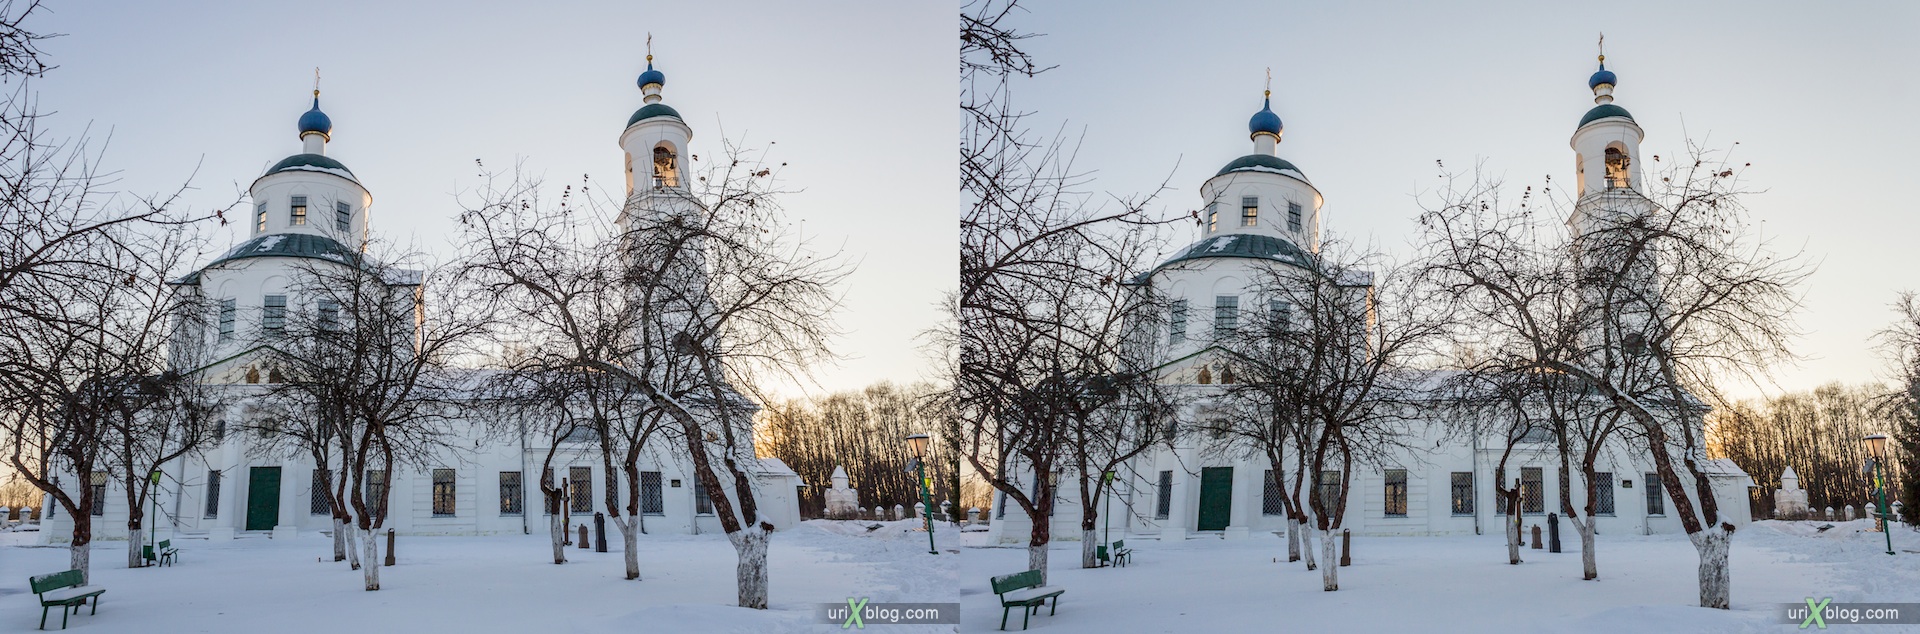 2012, Iosifo-Volotsky monastery, Moscow region, Russia, church, snow, winter, sunny, cold, 3D, stereo pair, cross-eyed, crossview, cross view stereo pair